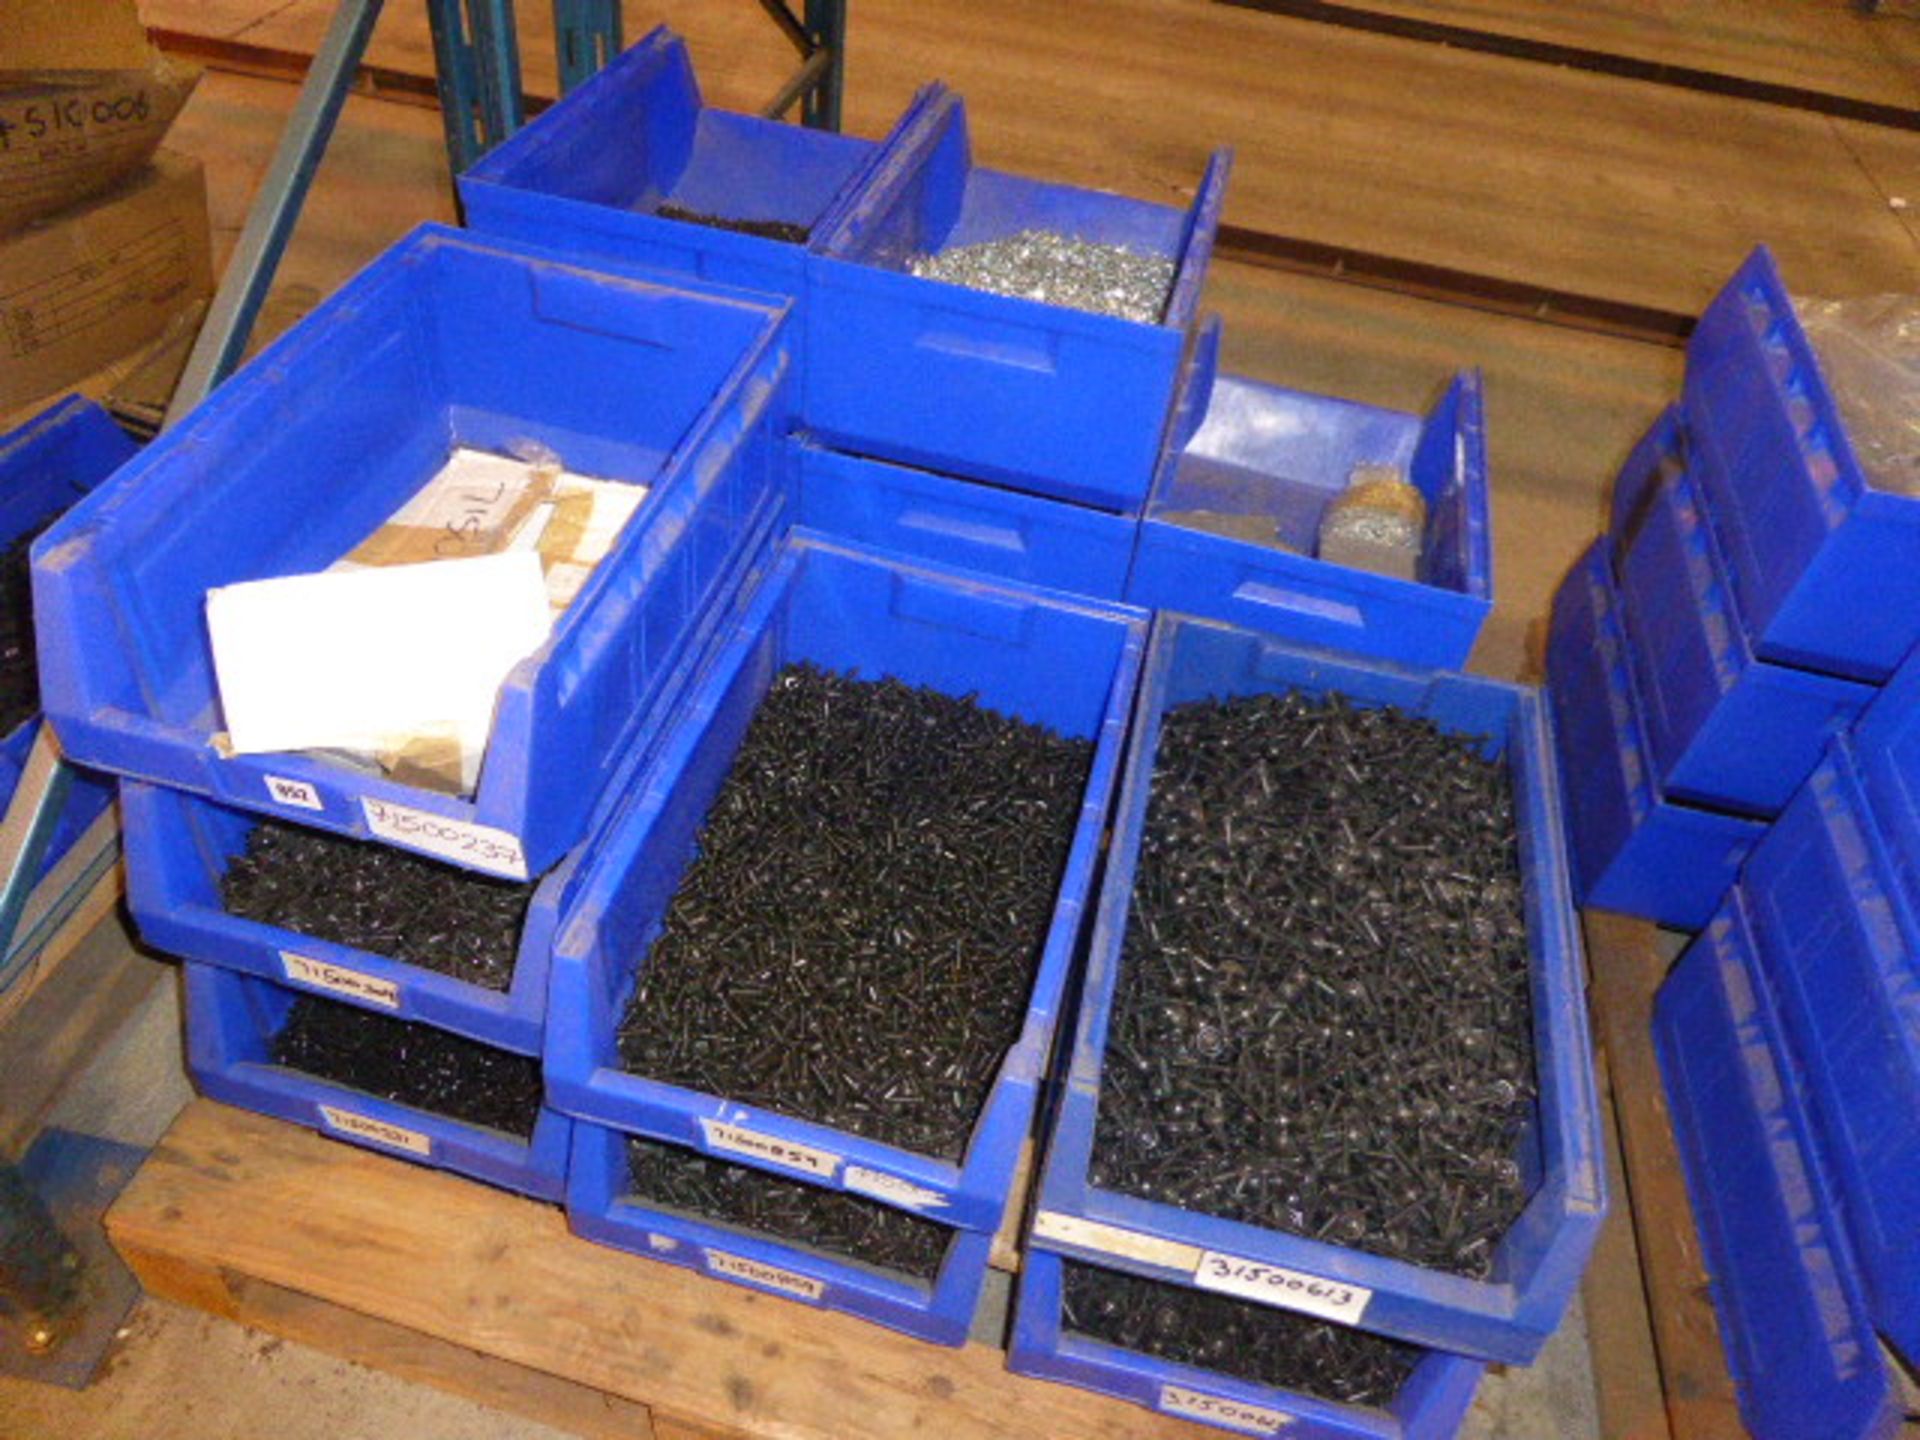 Large pallet of linbins containing nuts, bolts and screws